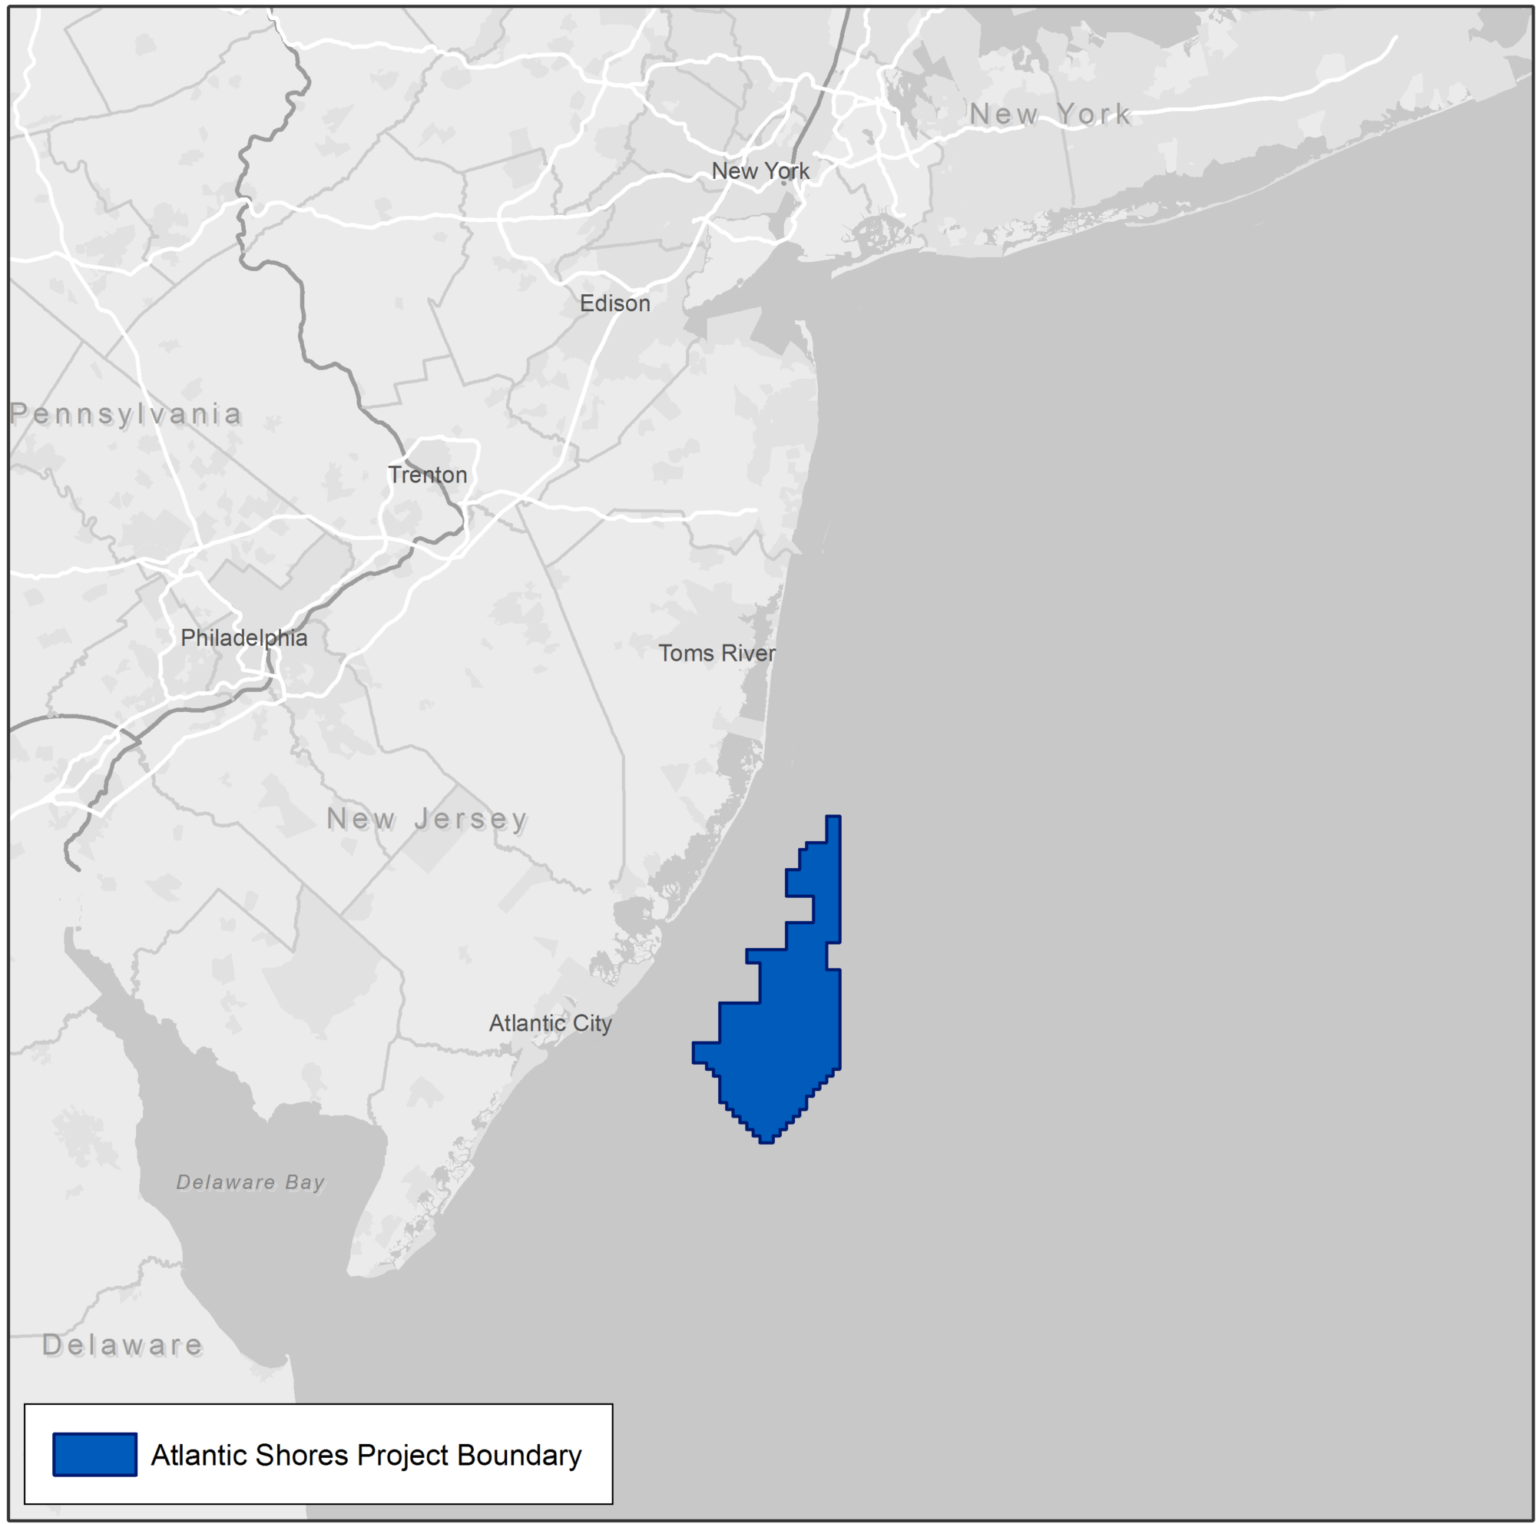 Atlantic Shores to Install Research Buoys at Offshore Wind Lease Area